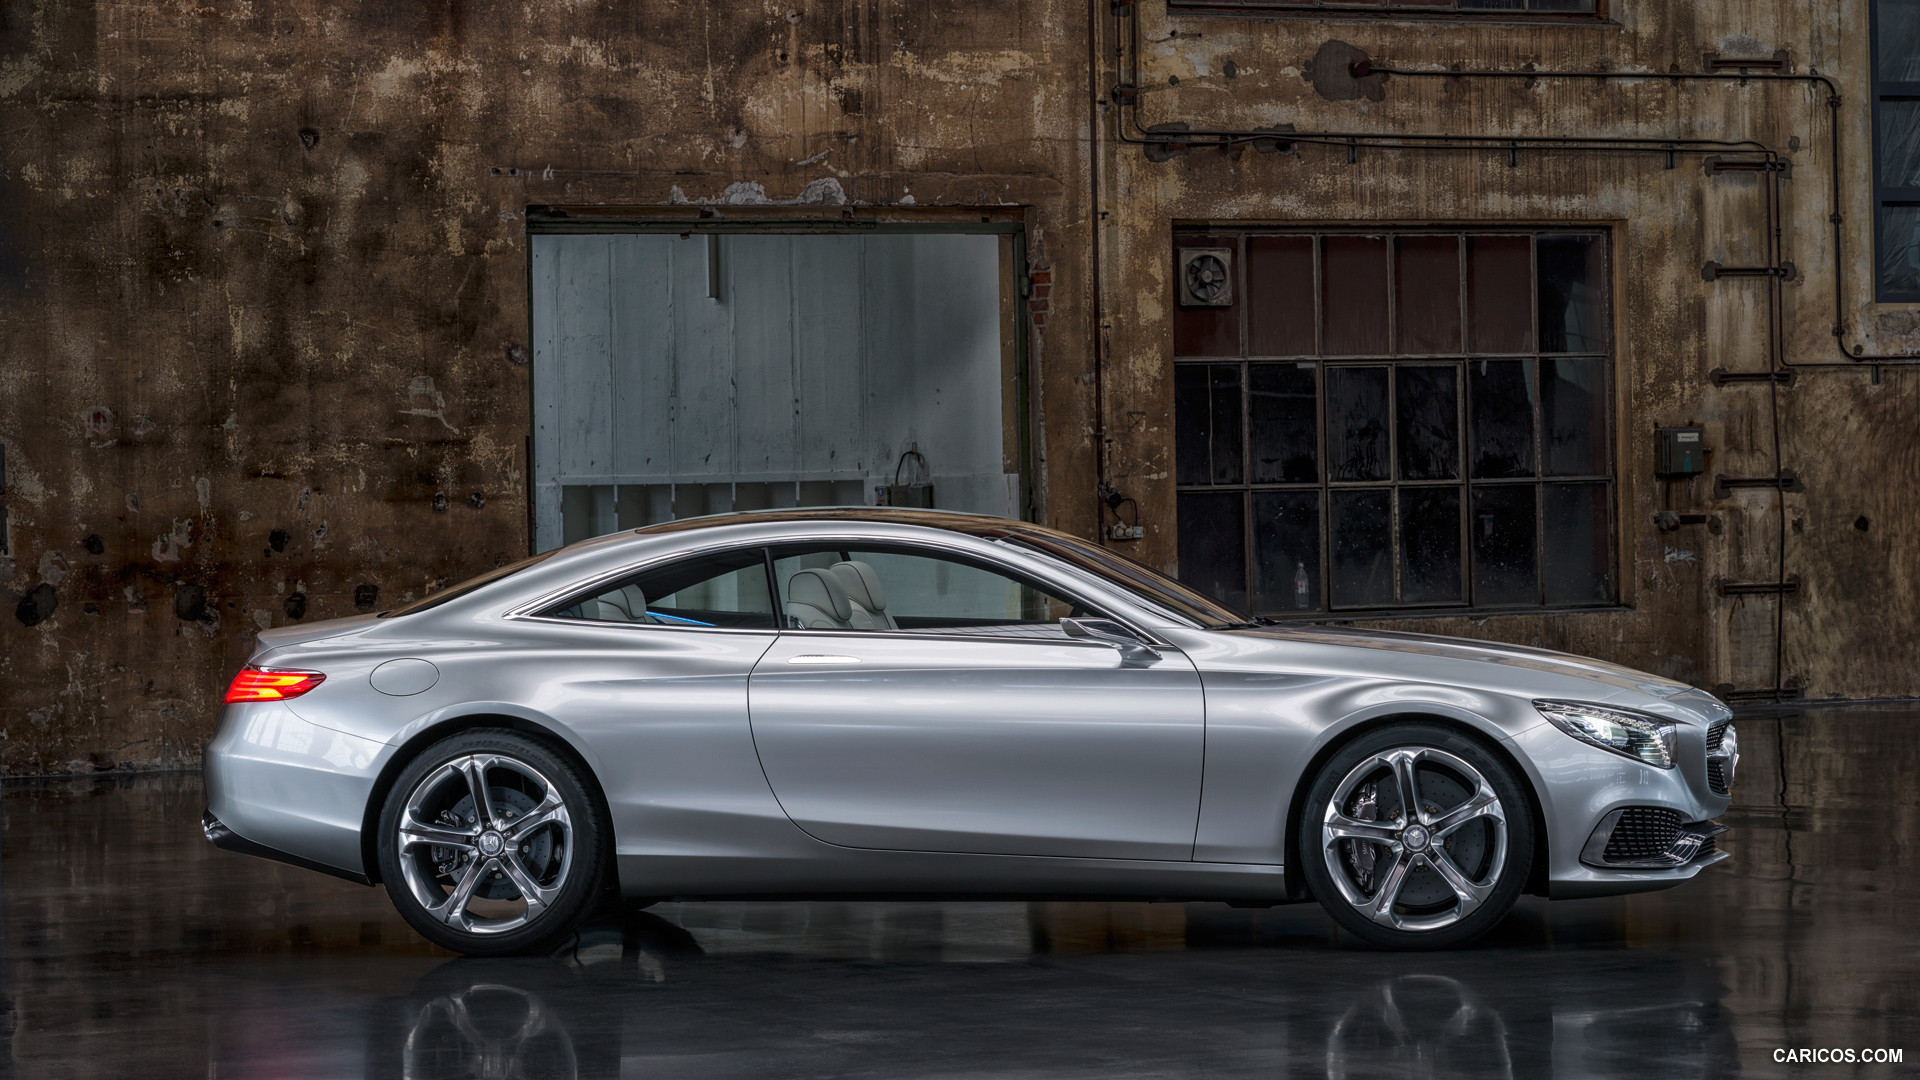 Mercedes-Benz S-Class Coupe Concept (2013)  - Side, #14 of 58